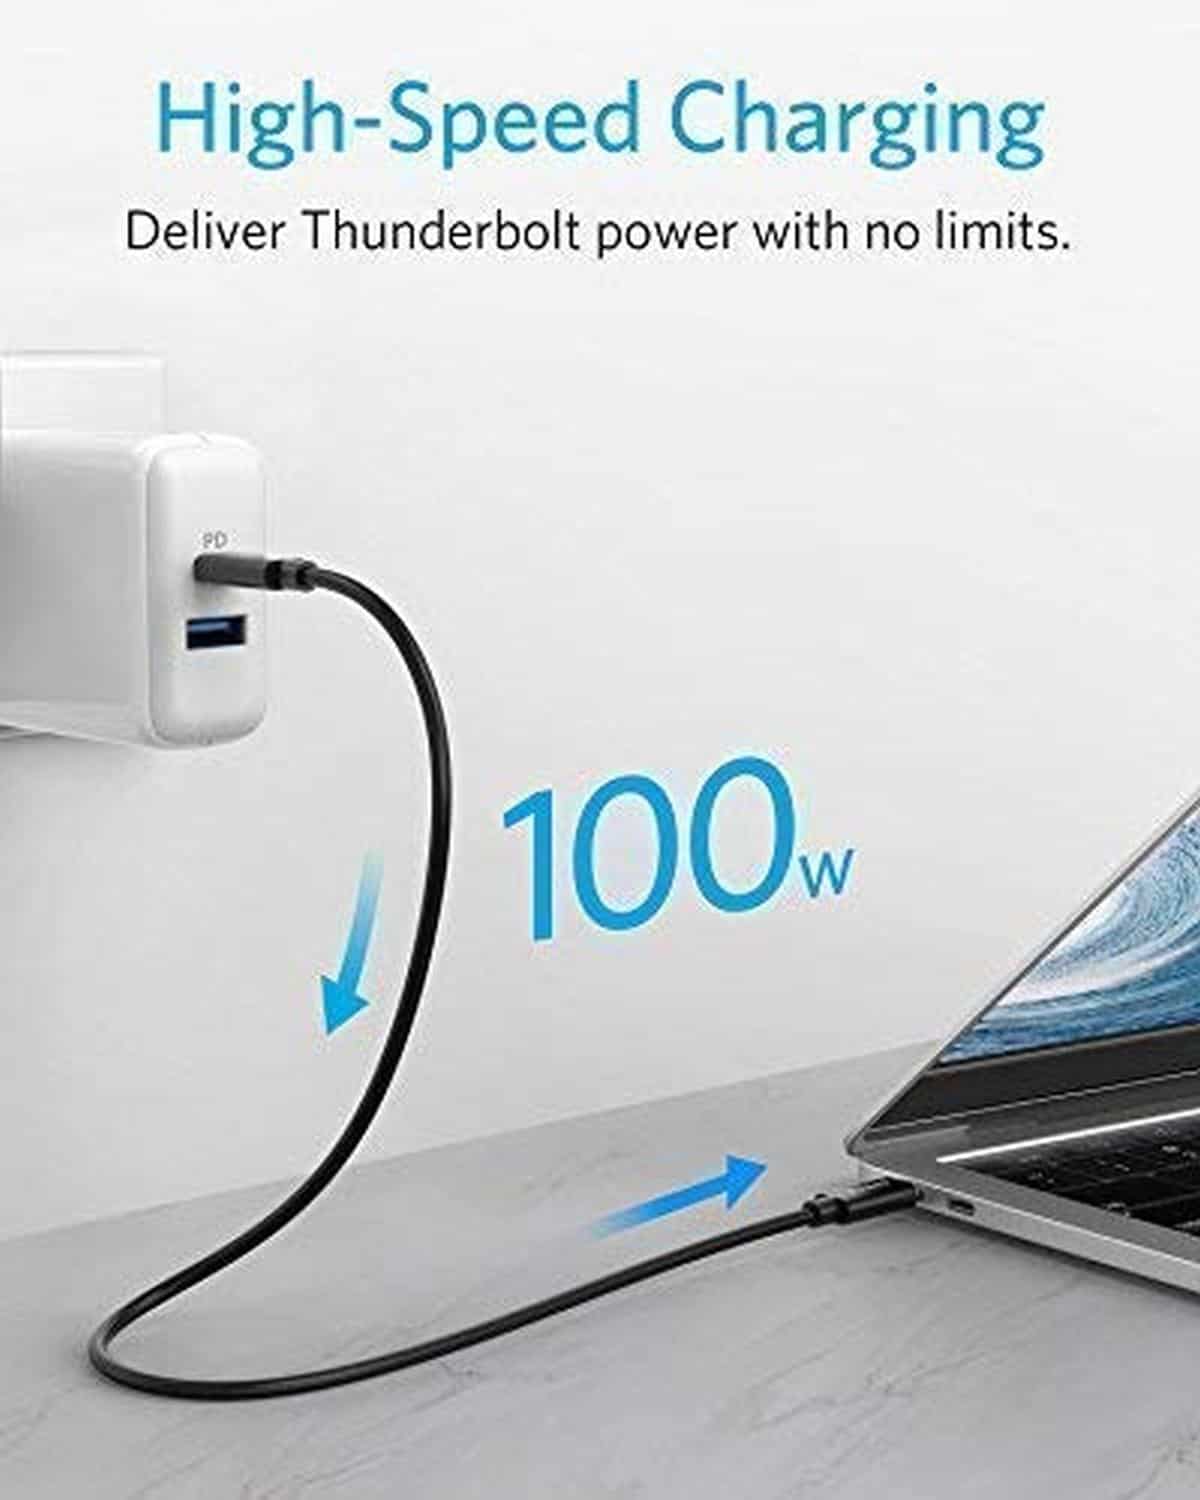 Anker USB-C to USB-C Thunderbolt 3.0 Cable | Best Macbook Accessories for 2019